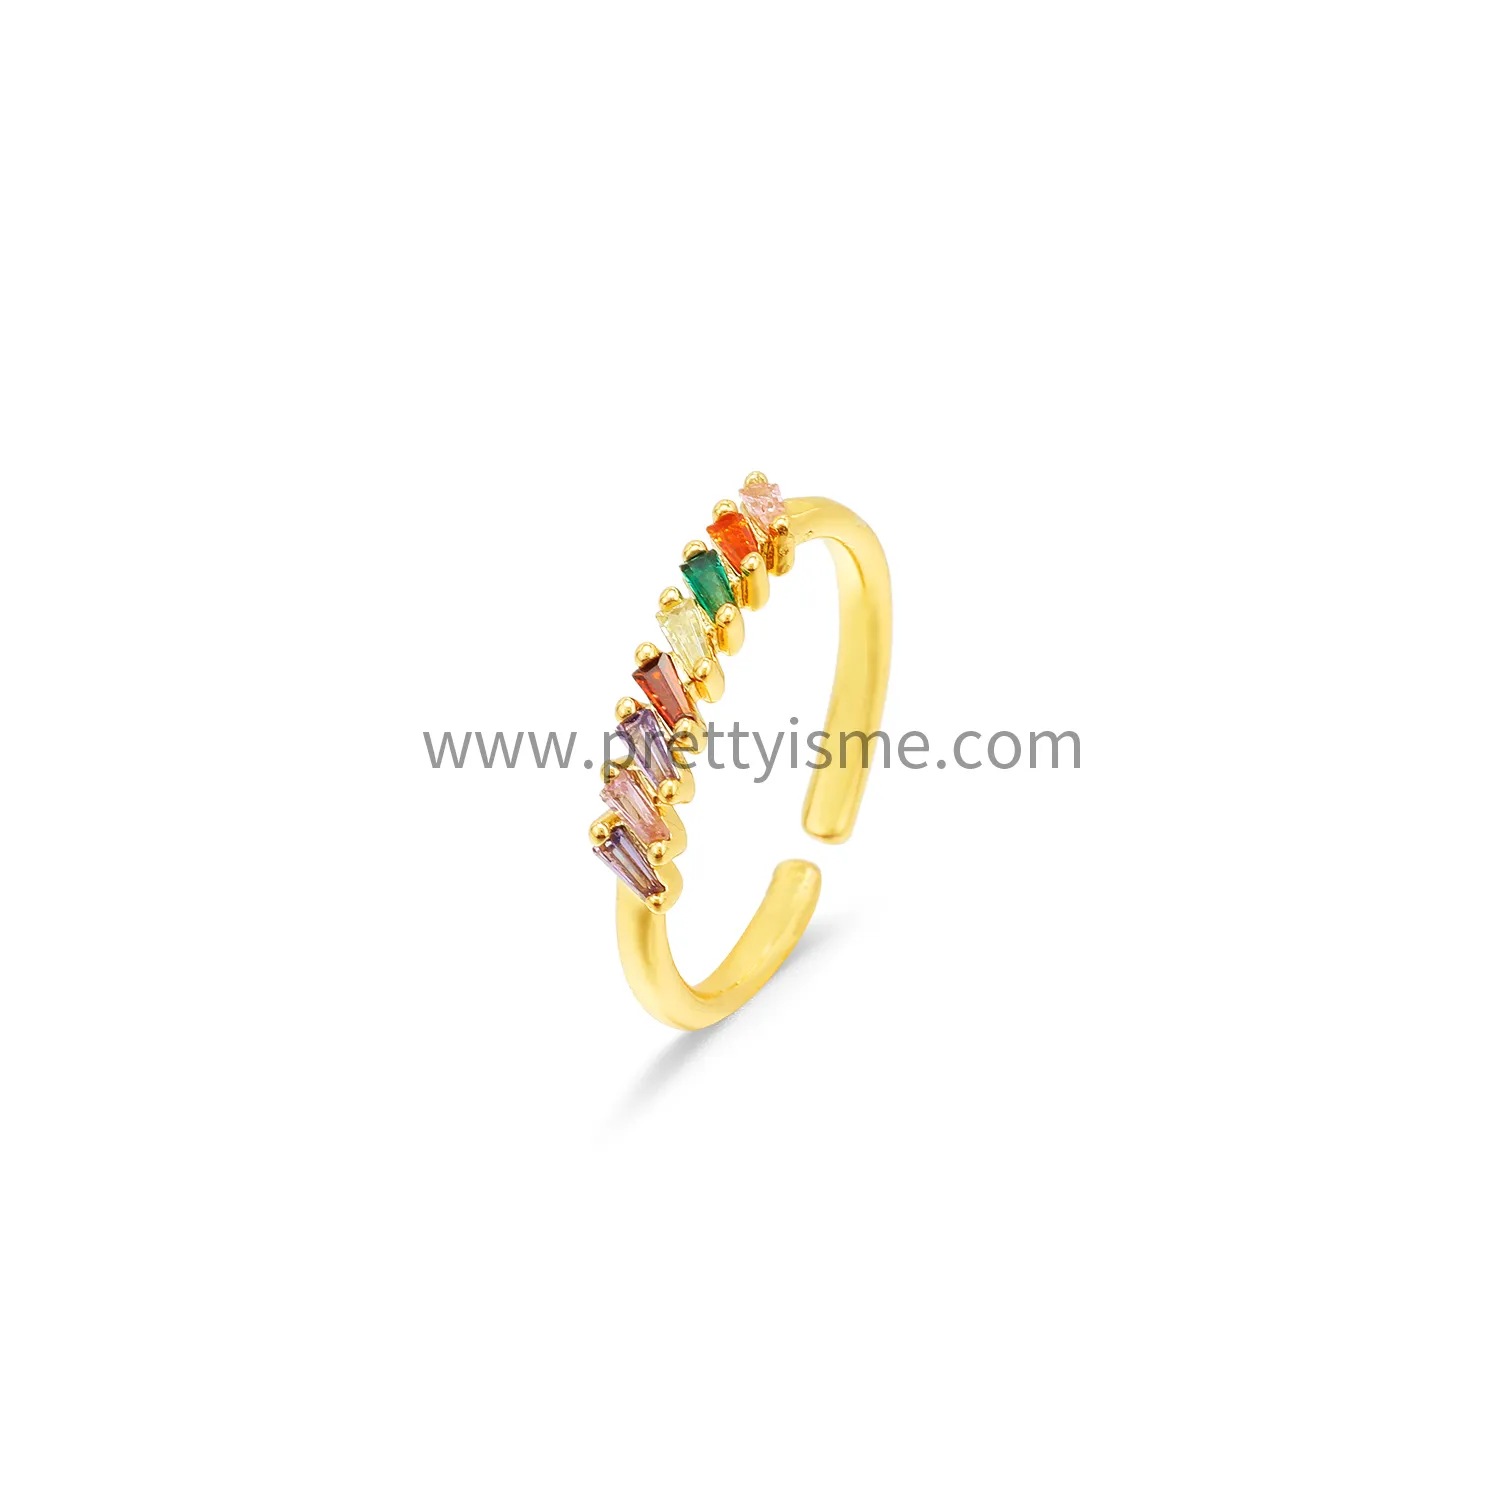 Charming Stainless Steel 18k Gold Plated Thin Ring Open Set with Multi-Colored Row of Diamonds (5).webp